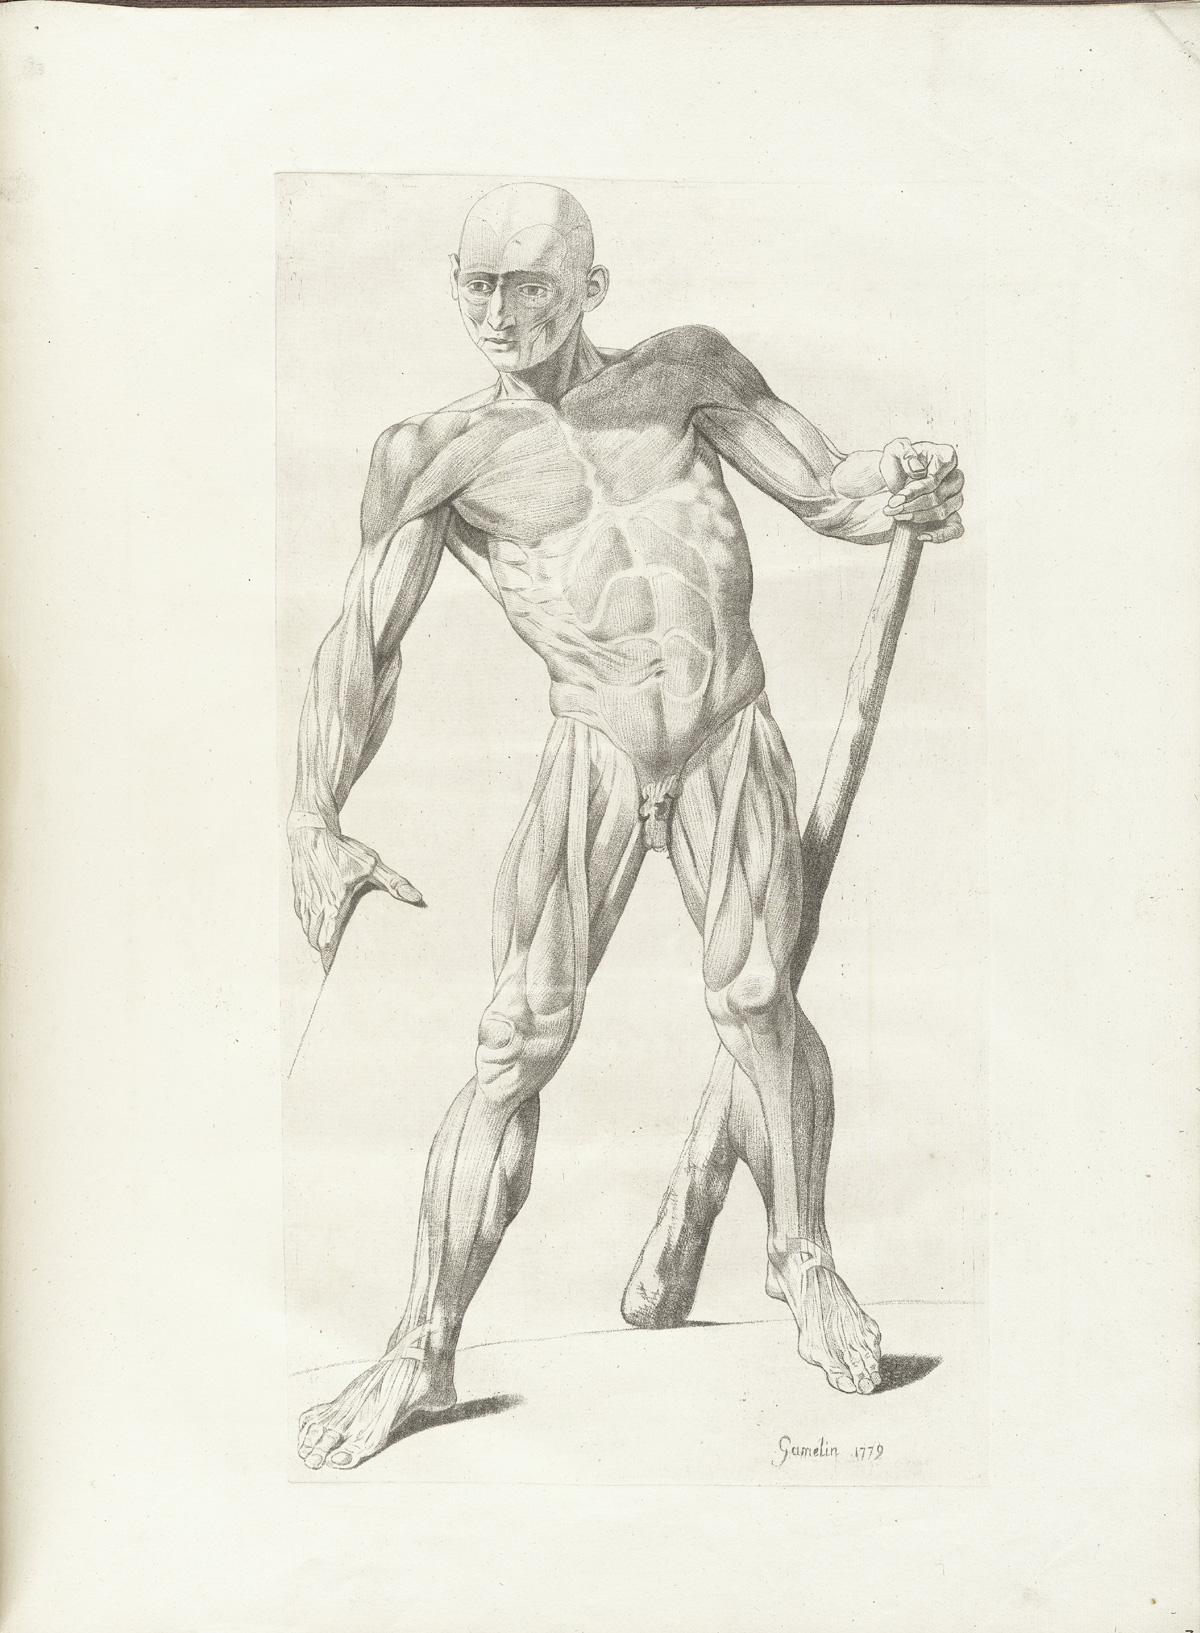 Engraving of a facing standing male muscle figure with legs standing apart and holding a staff in his left hand, showing the muscles of the chest, torso, abdomen, arms and legs, from Jacques Gamelin’s Nouveau recueil d’osteologie et de myologie, NLM Call no.: WZ 260 G178m 1779.